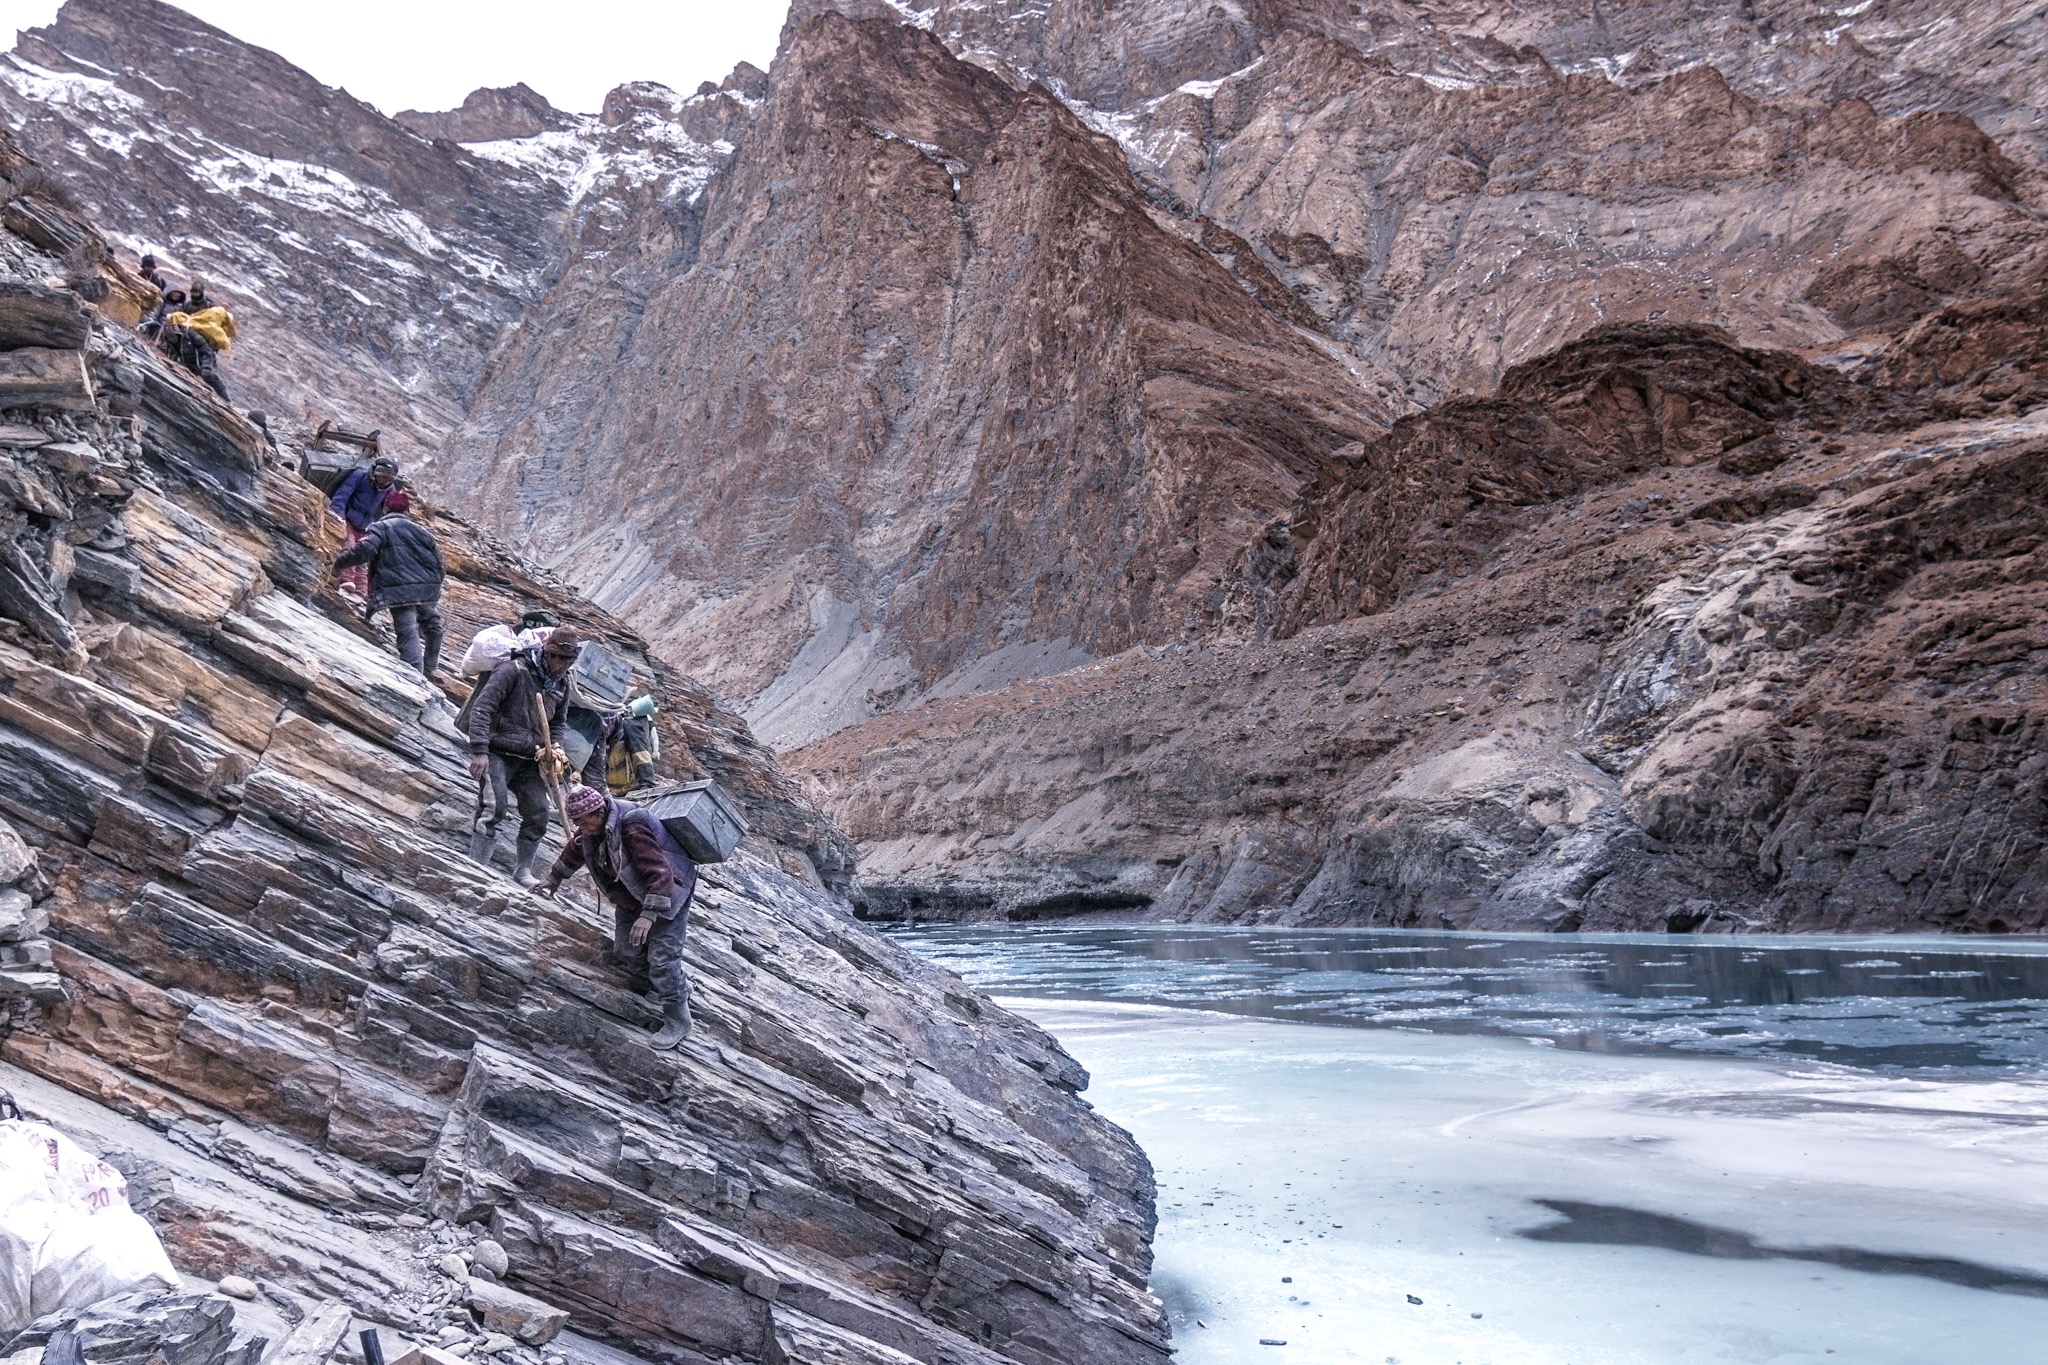 The chadar thaws at temperatures above -18C. As the ice opens up, travelers have to climb gorge walls polished smooth by millennia of summer erosion